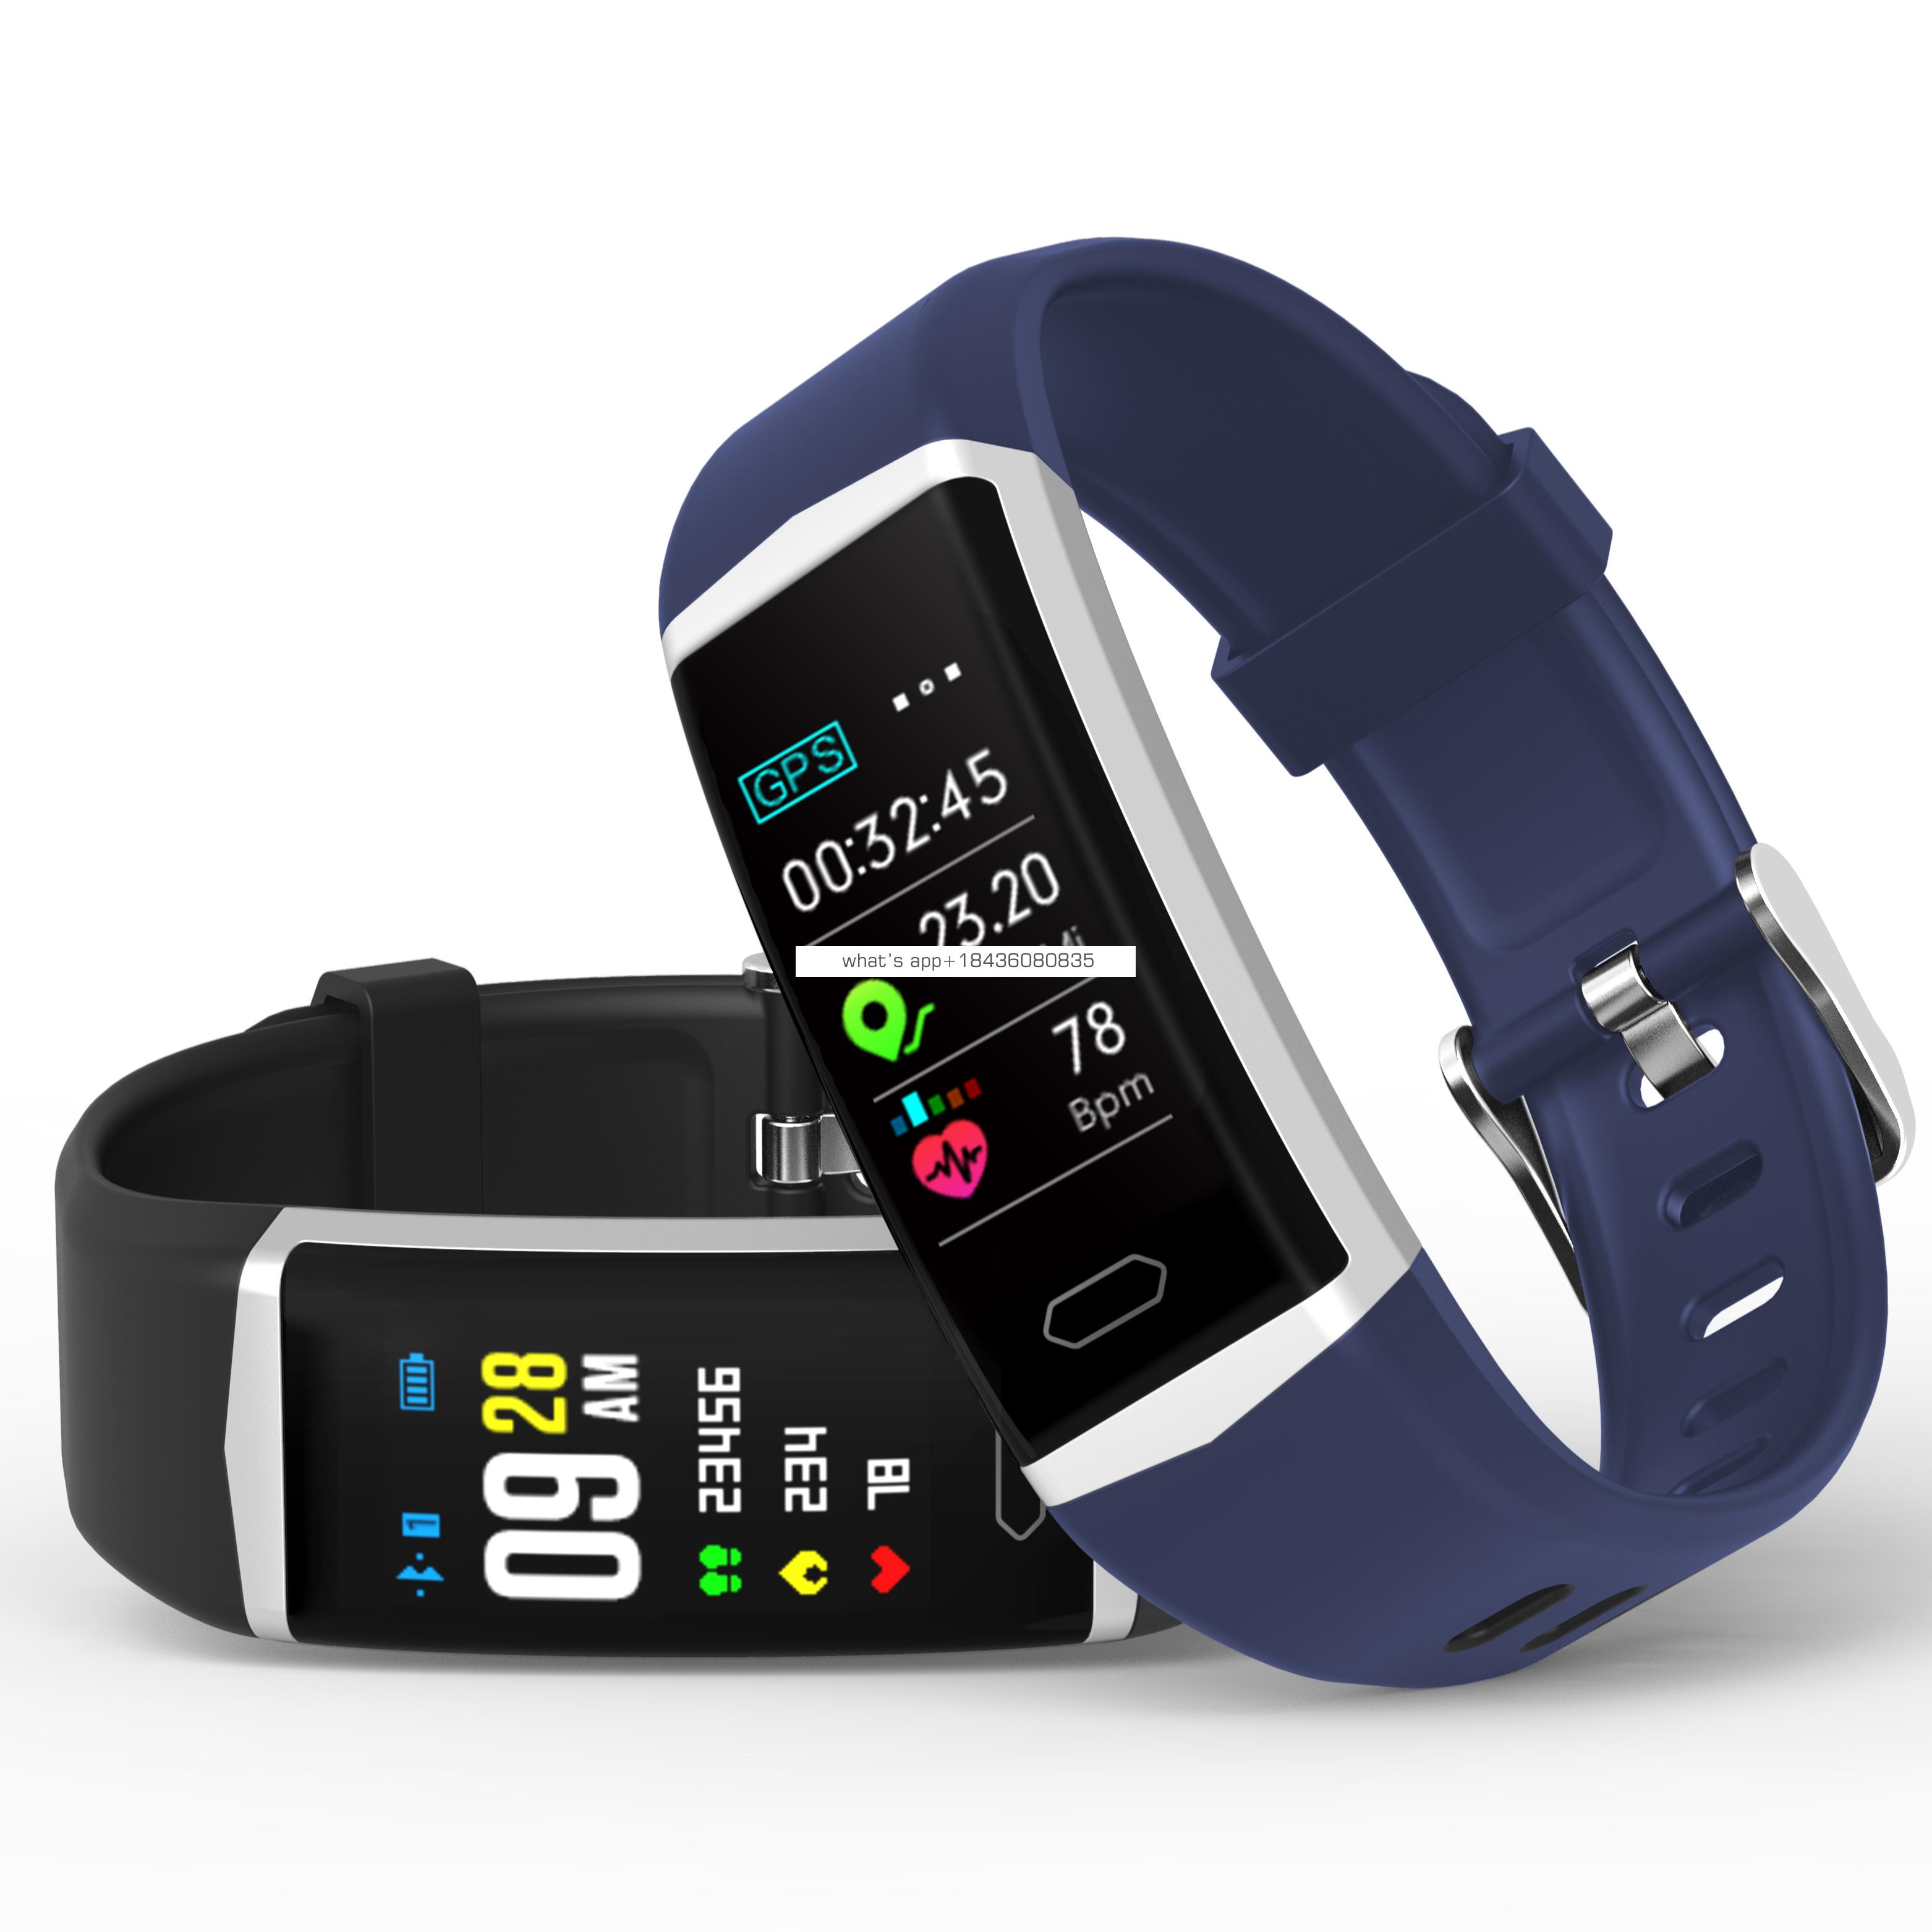 Waterproof android phone  smartwatch smart bracelet that can measure blood pressure and heart rate